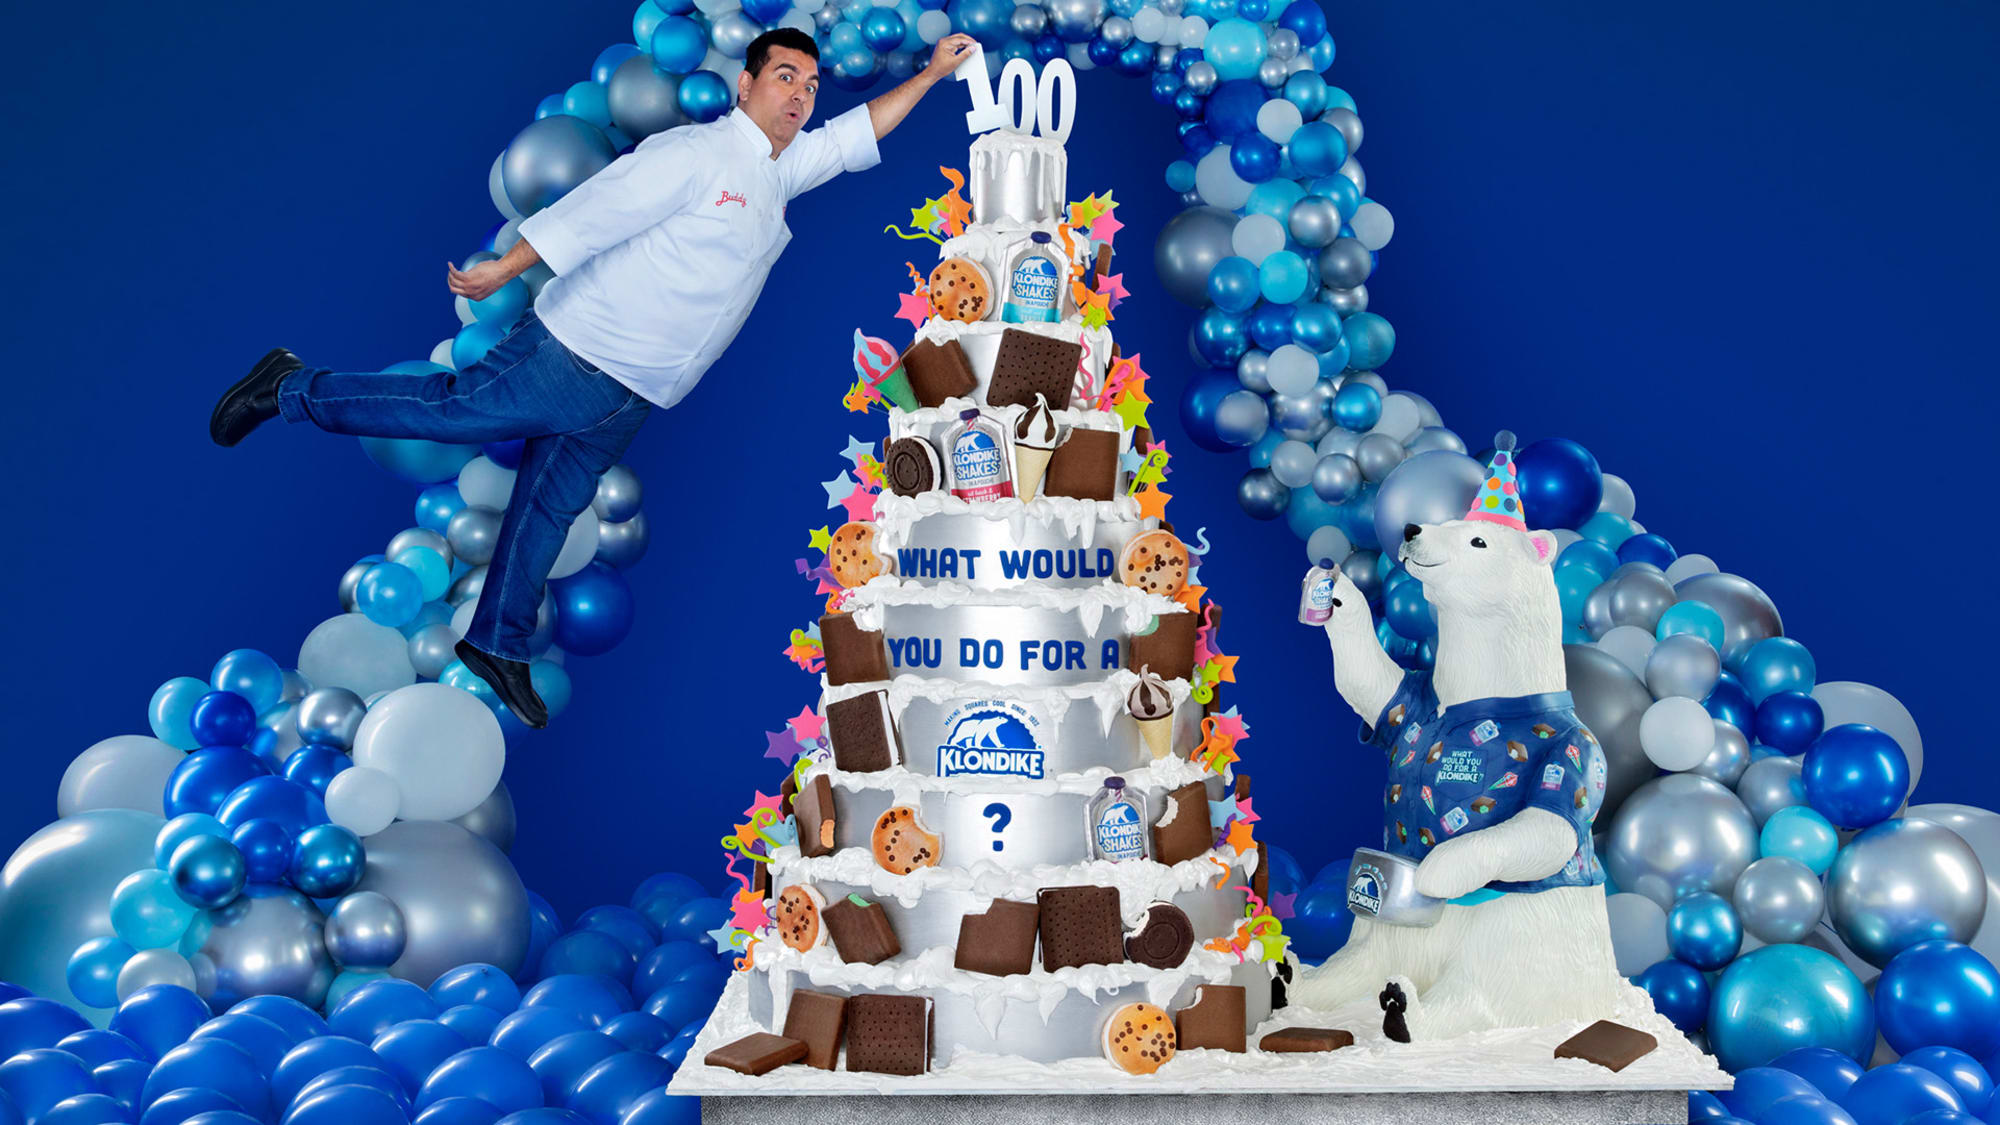 Klondike asks what you would do for its epic 100th birthday